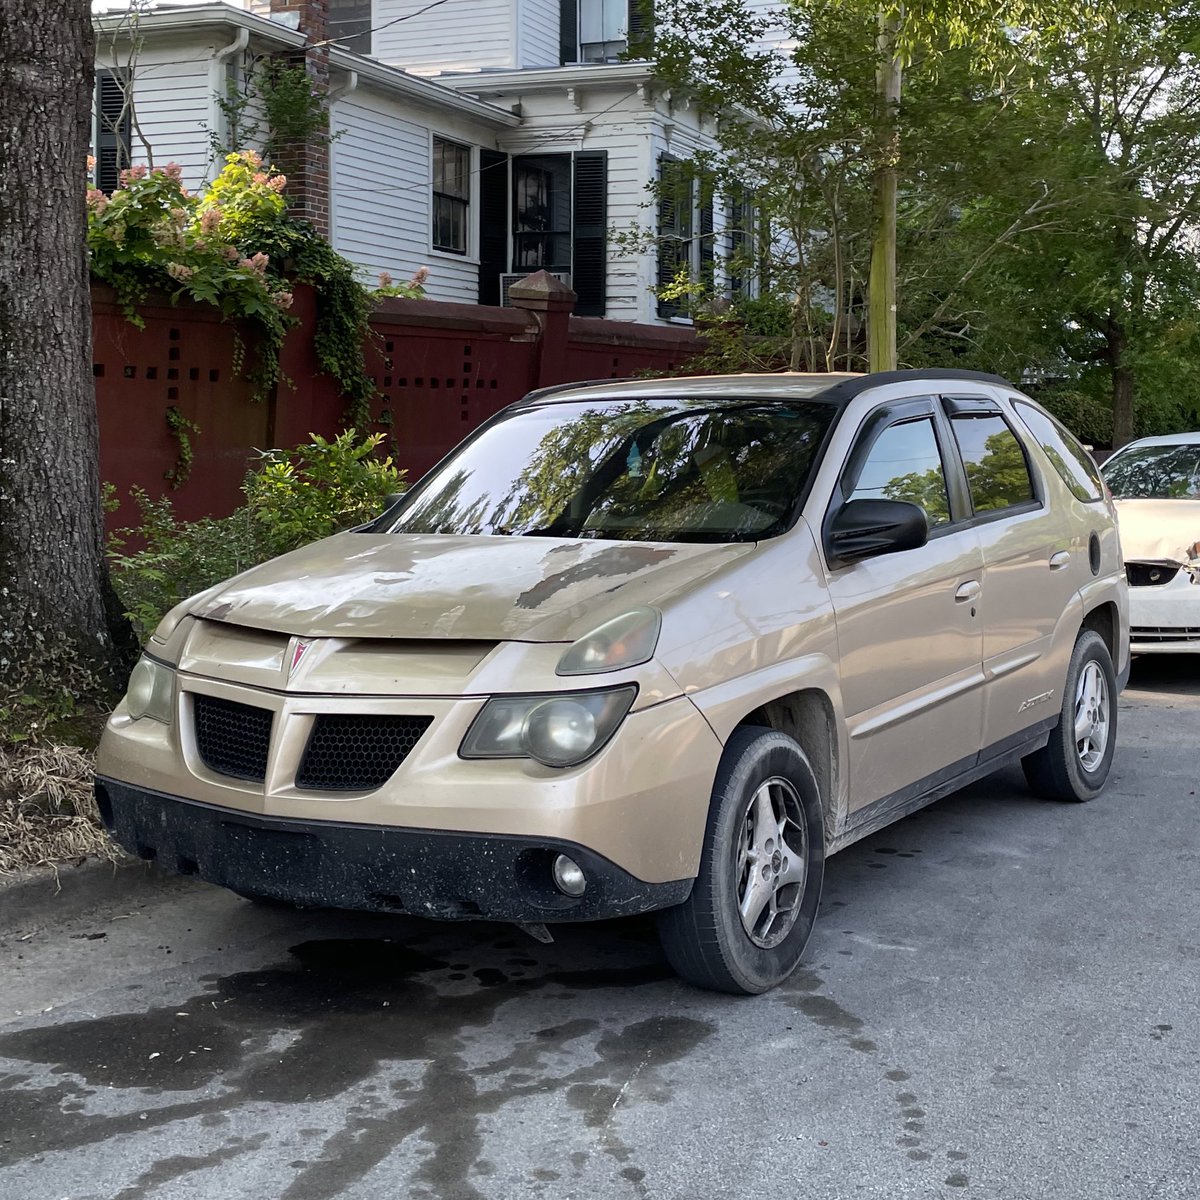 I’m happy to report the Aztek population is alive and well in New Bern, NC.

#carspotting #unlovedcars #pontiacaztek